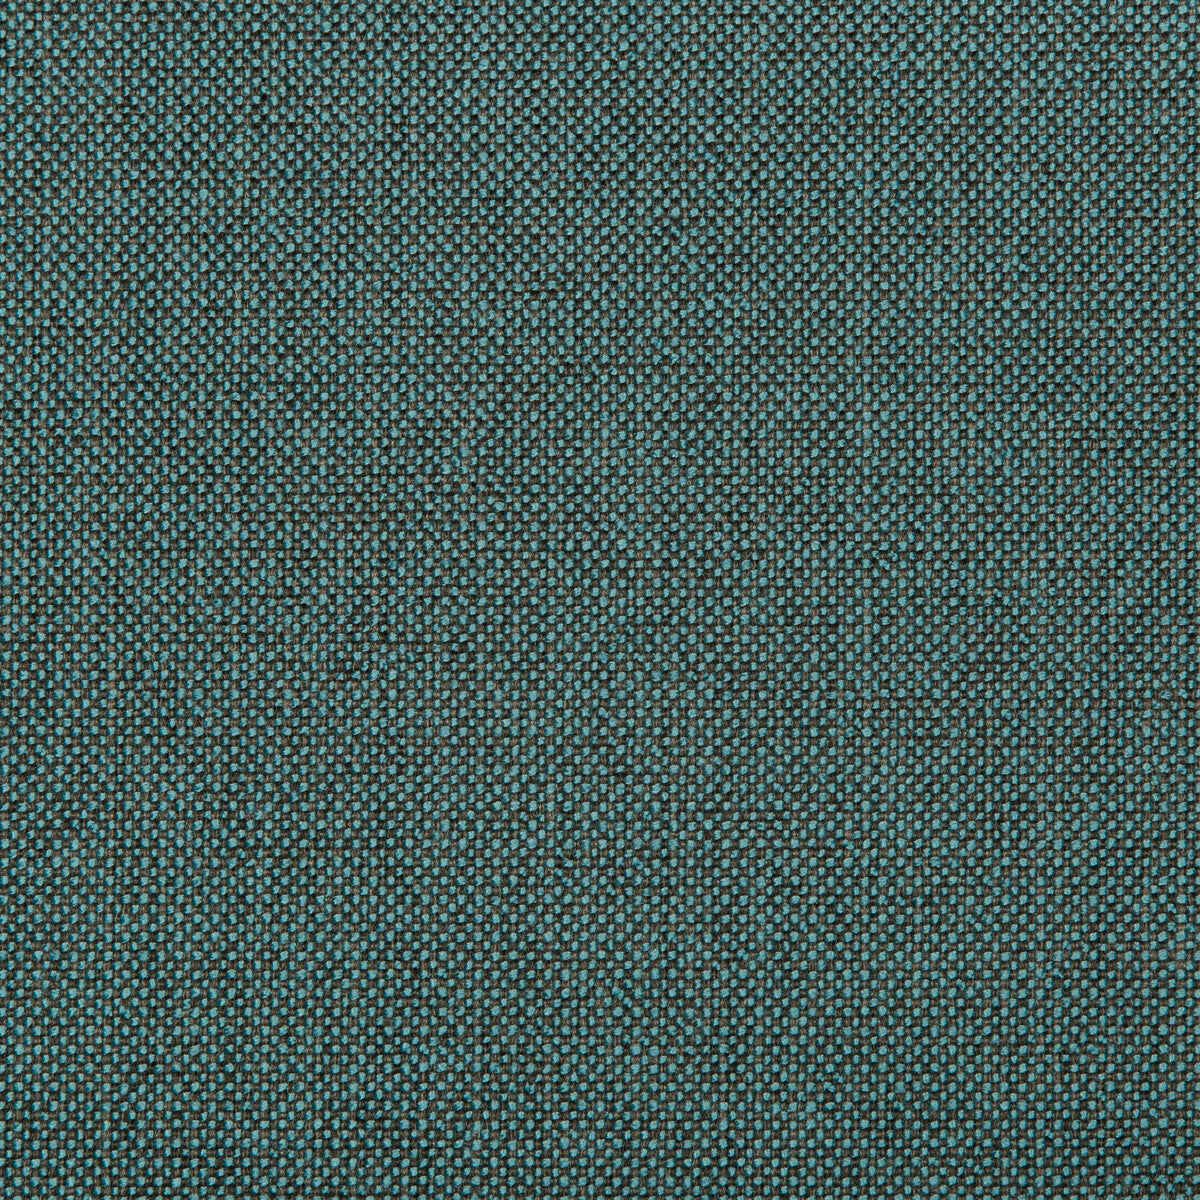 Williams fabric in lagoon color - pattern 35744.35.0 - by Kravet Contract in the Value Kravetarmor collection